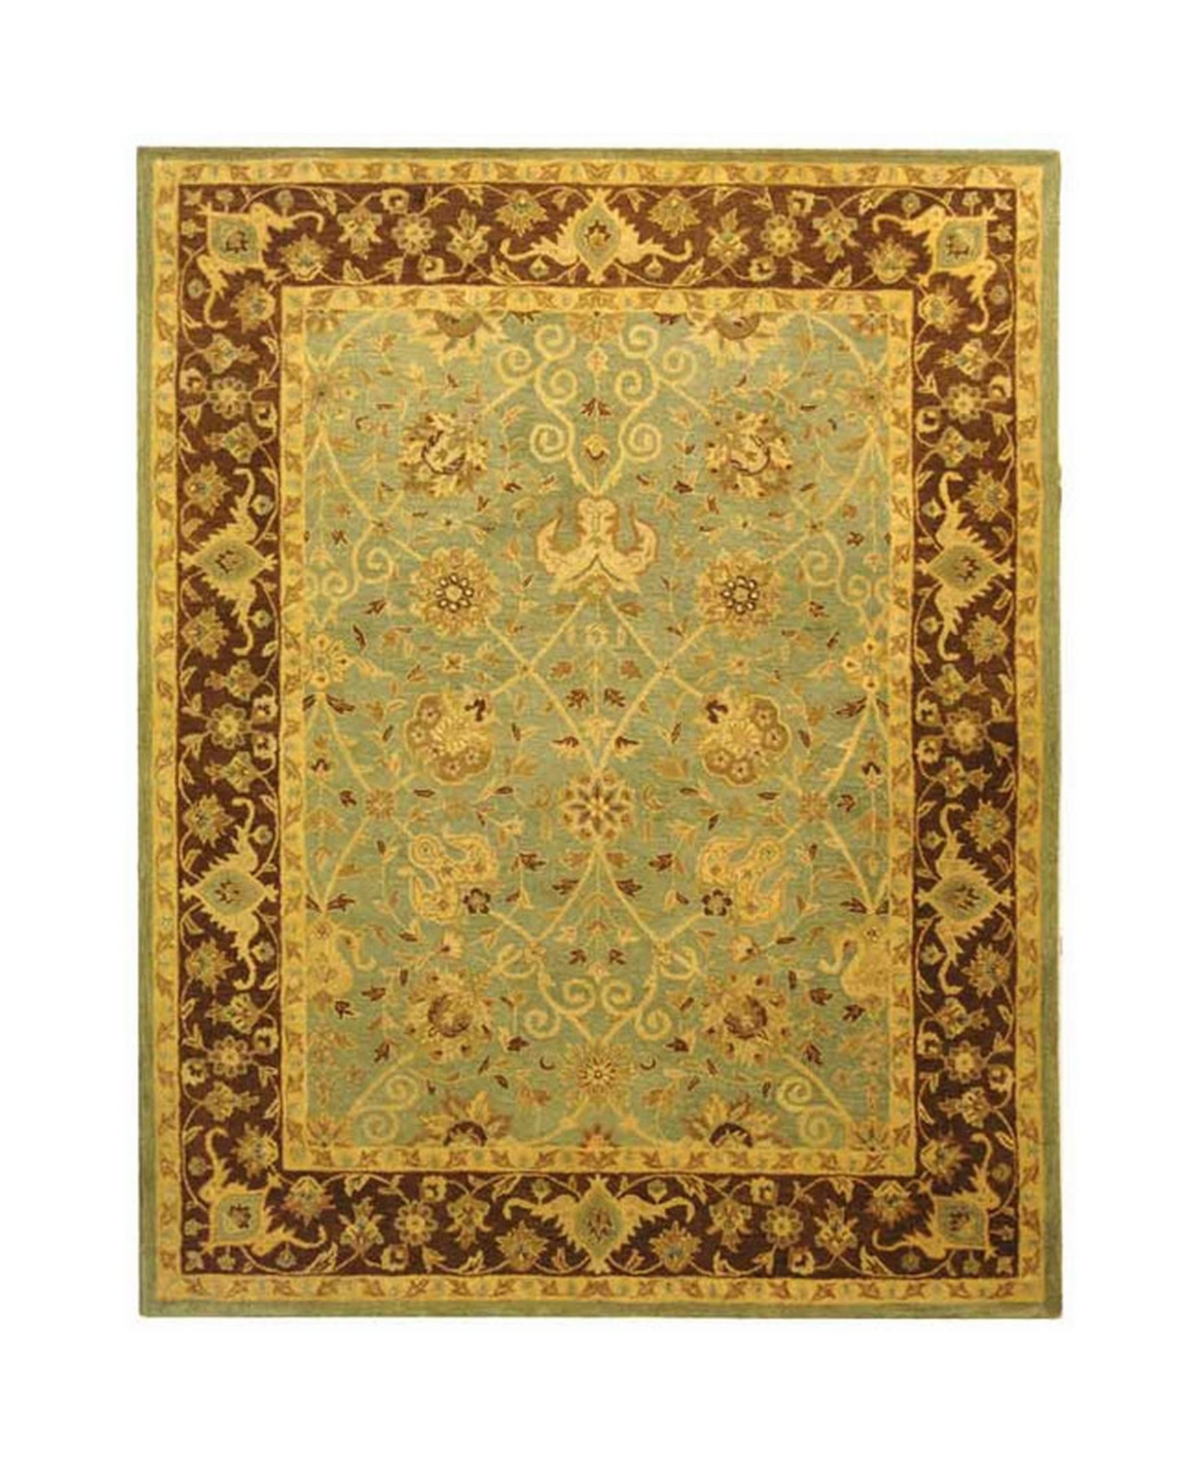 Safavieh Antiquity At21 Green 7'6" X 9'6" Area Rug